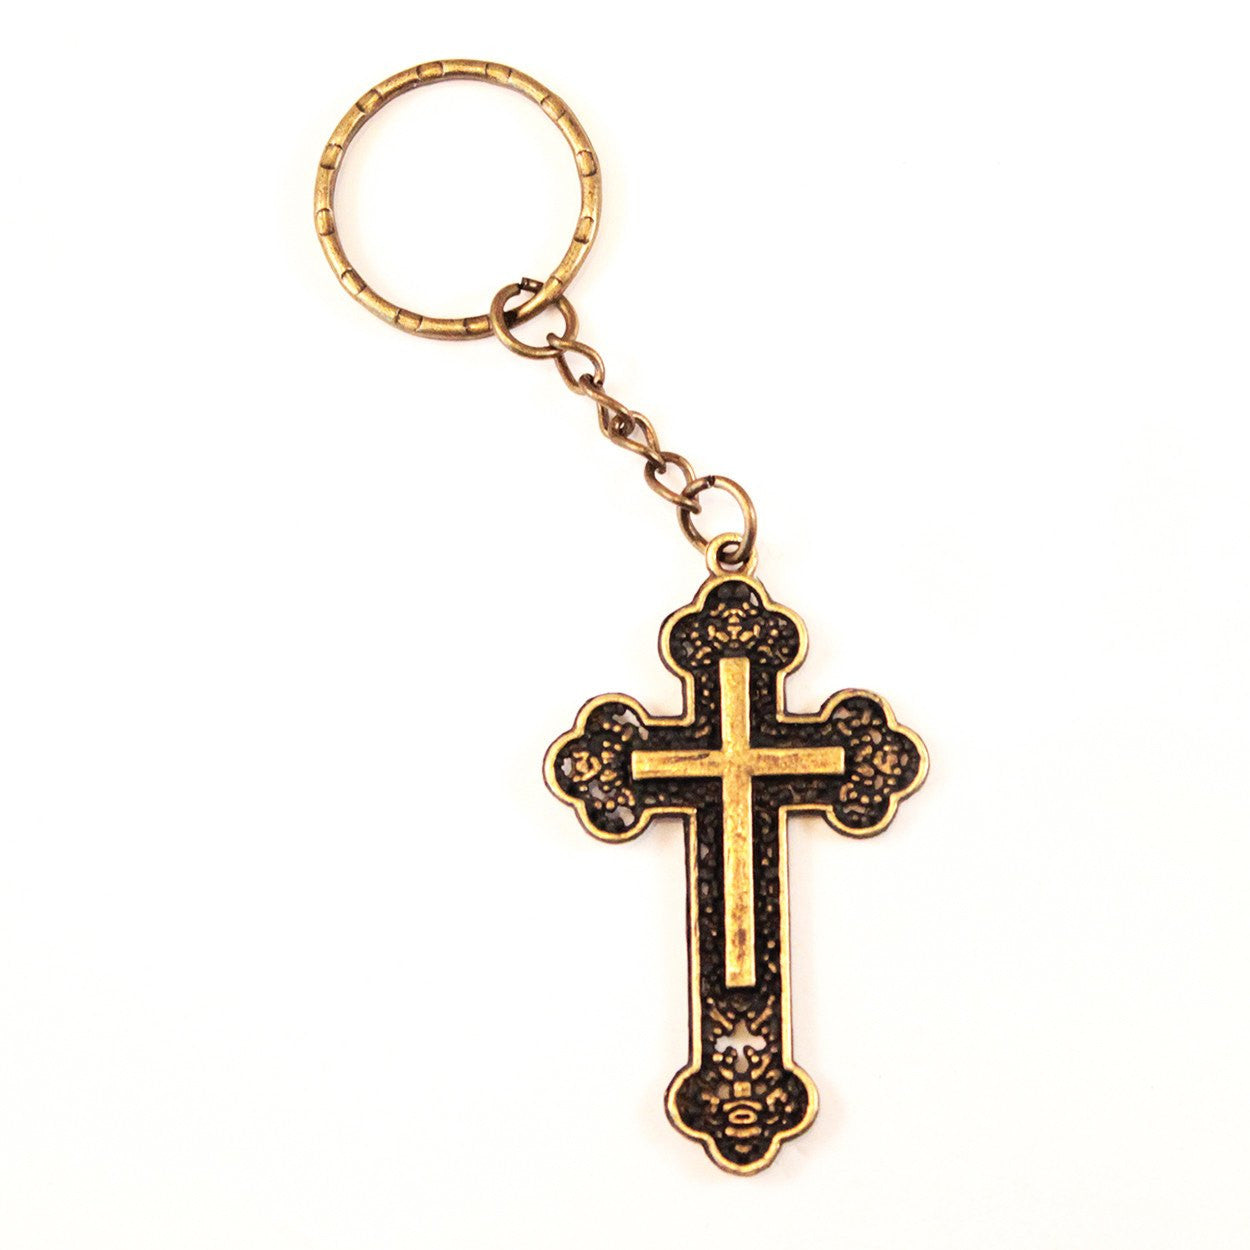 Hand-Painted Cross Keychain: Carry Your Faith Everywhere! - Jewelry & Watches - Bijou Her -  -  - 